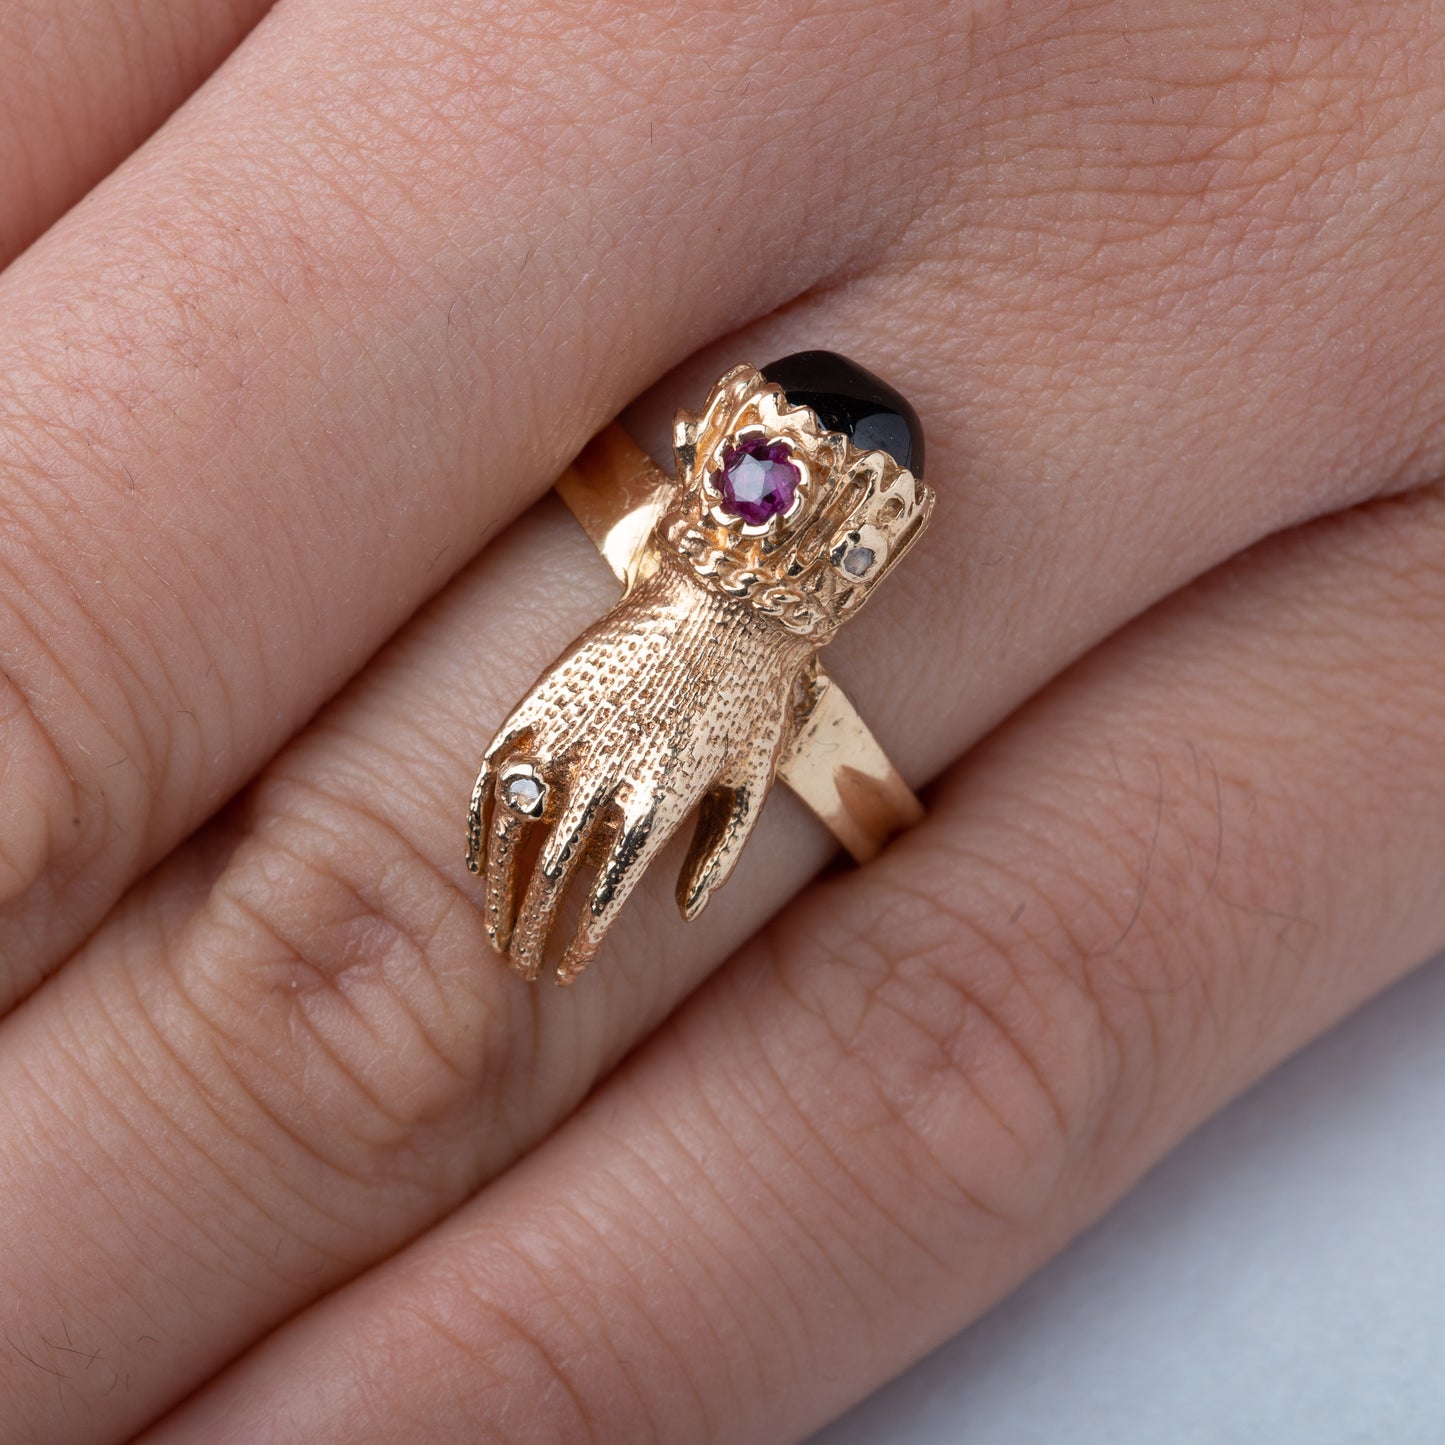 Victorian Inspired Fede Hand Ring